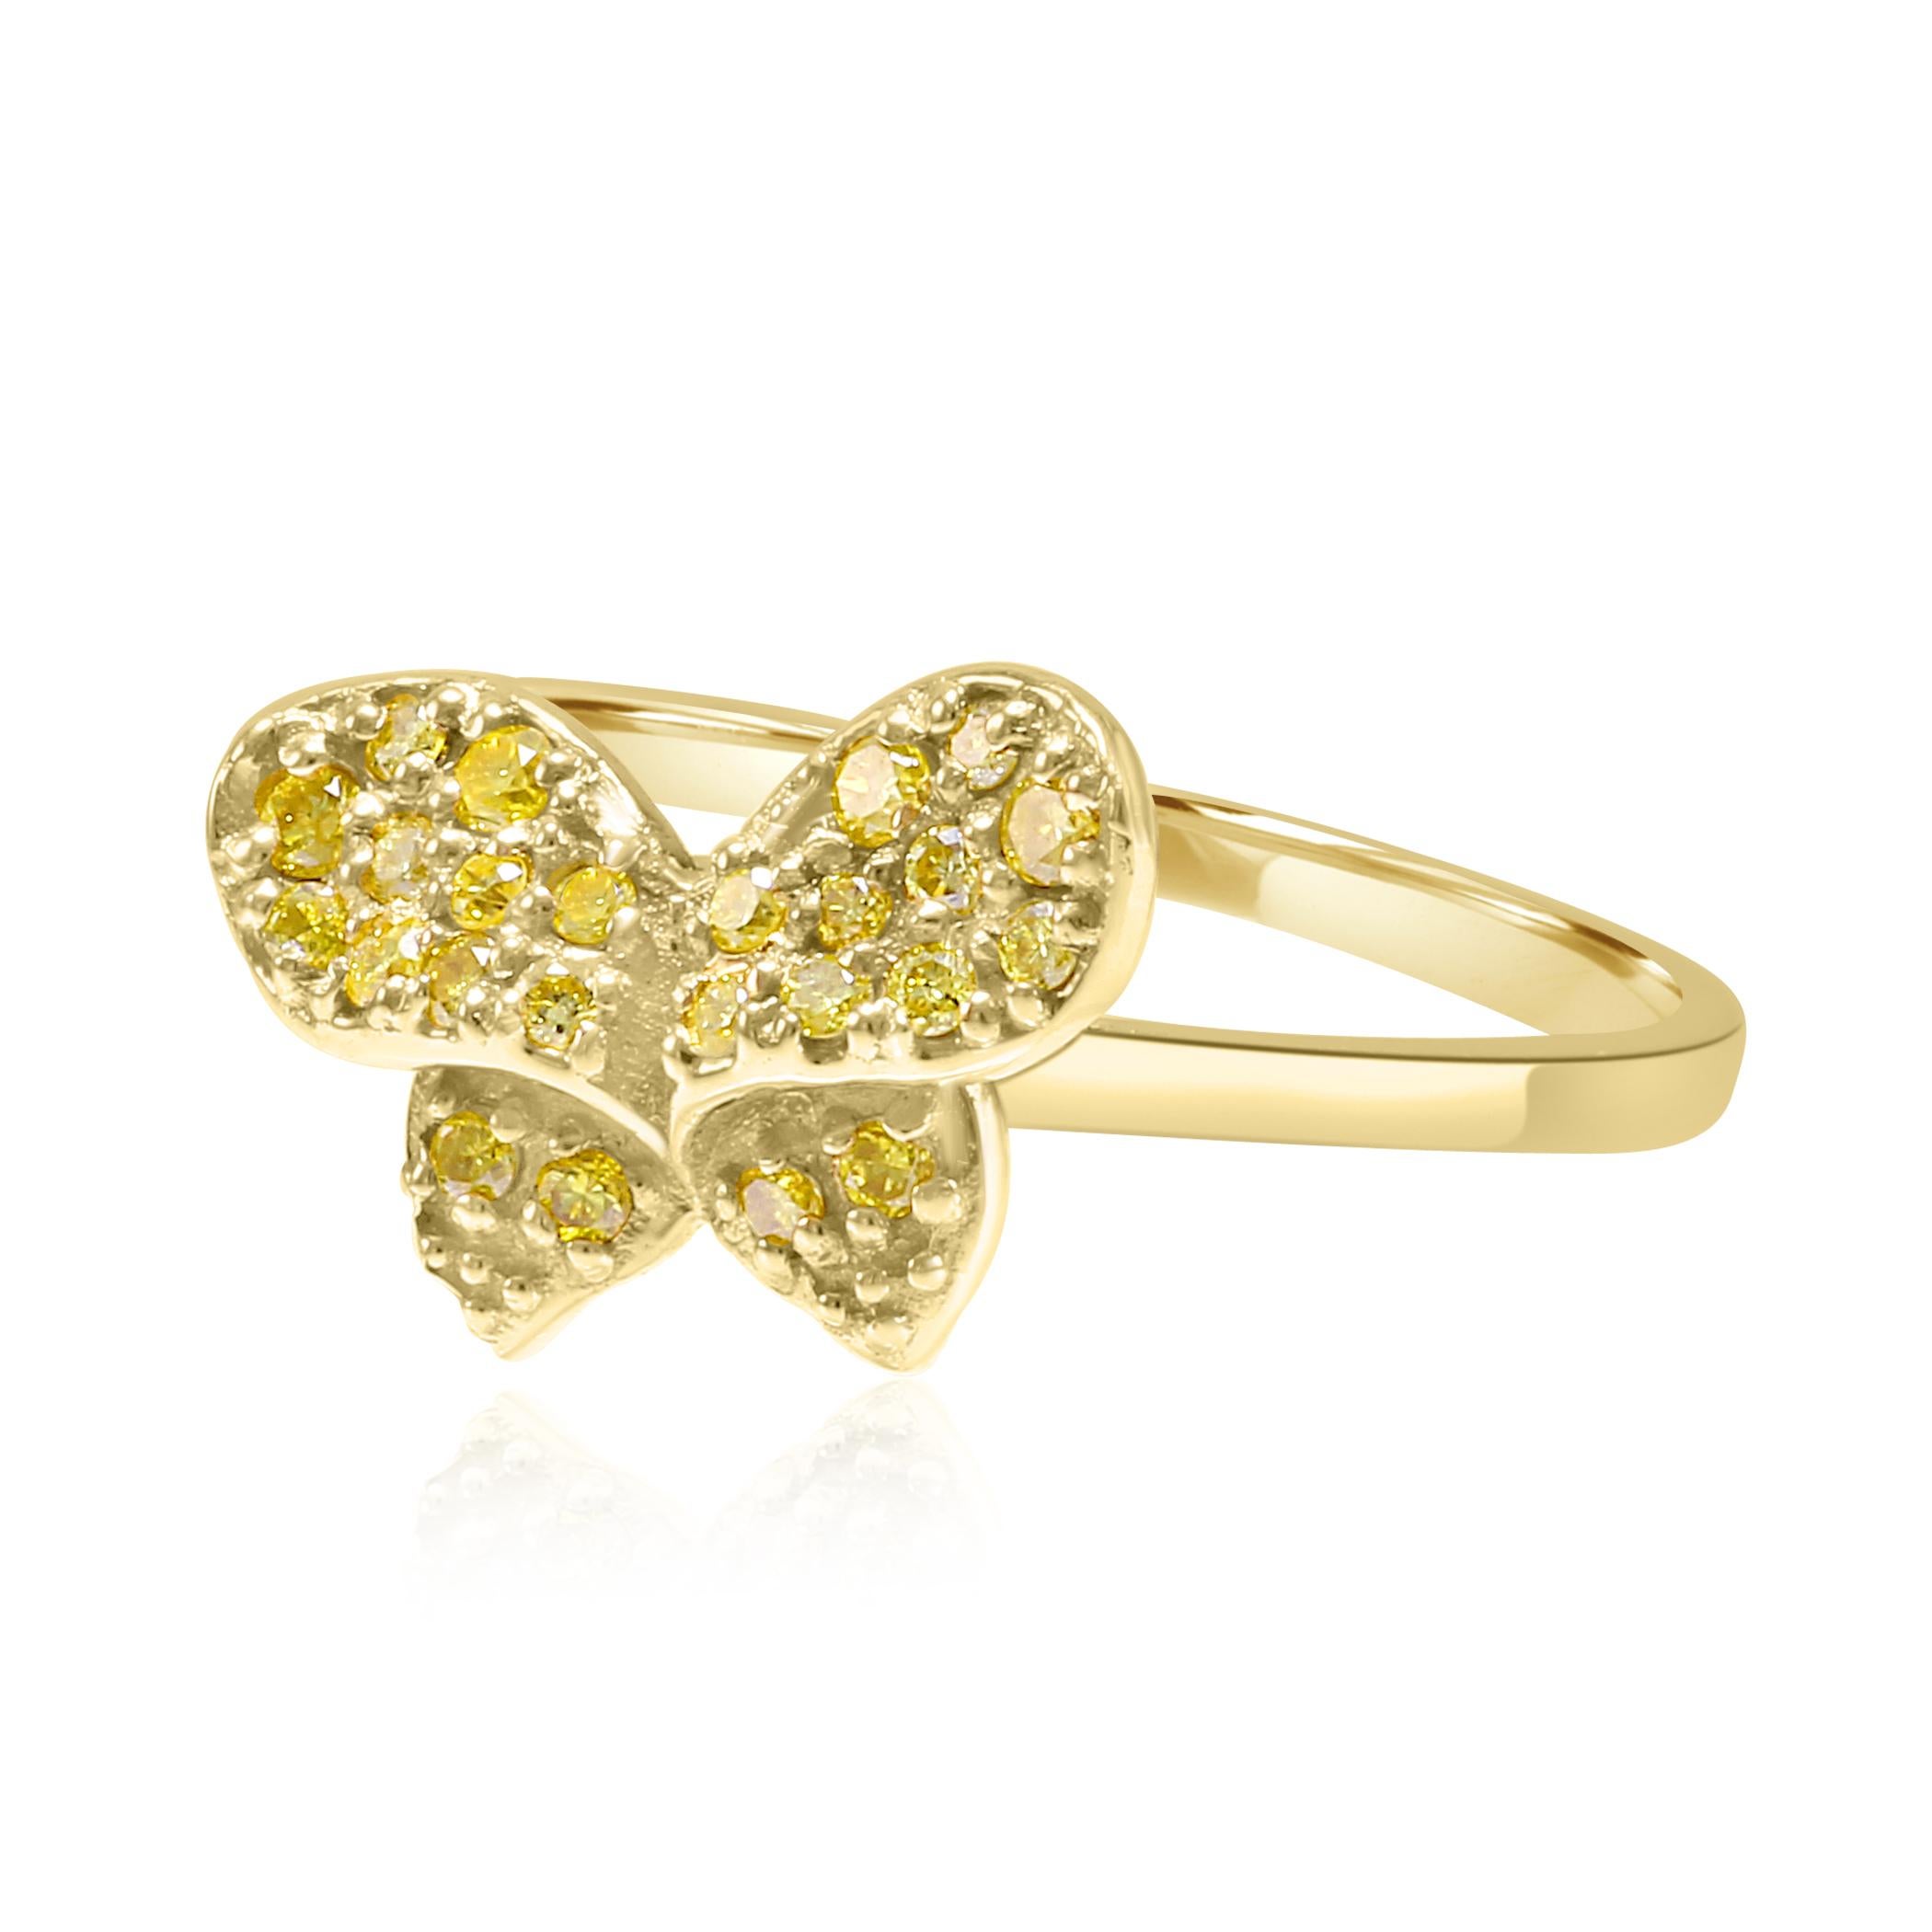 20 Natural Fancy Yellow Diamond Round Si Clarity 0.16 Carat set in 14K Yellow Gold Stackable Fashion Cocktail  Butterfly Ring.

MADE IN USA
Total Diamond Weight 0.16 Carat

Style available in all gold colors and stone colors in different price